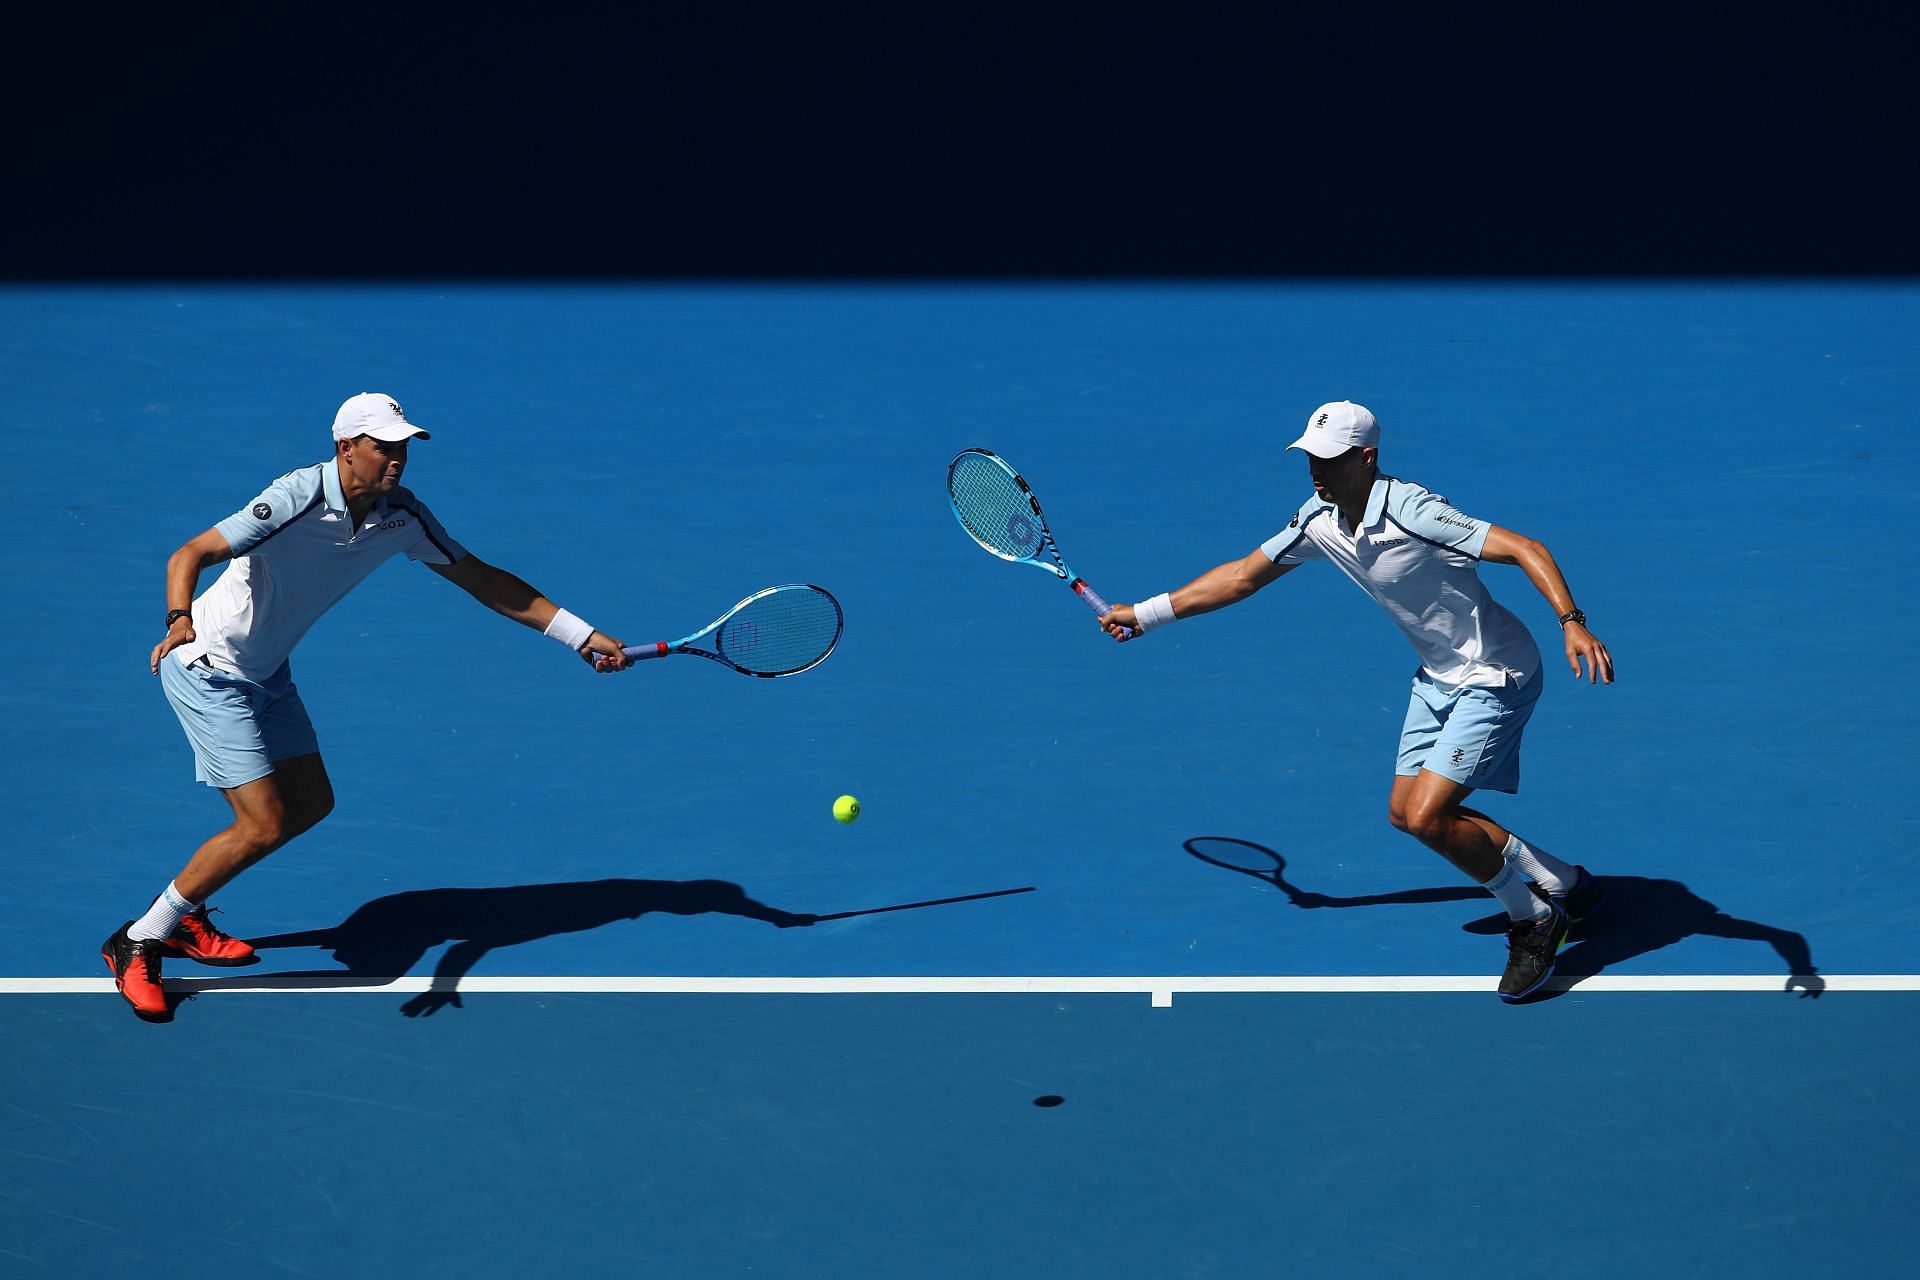 Mike Bryan and Bob Bryan in action at the 2019 Australian Open.